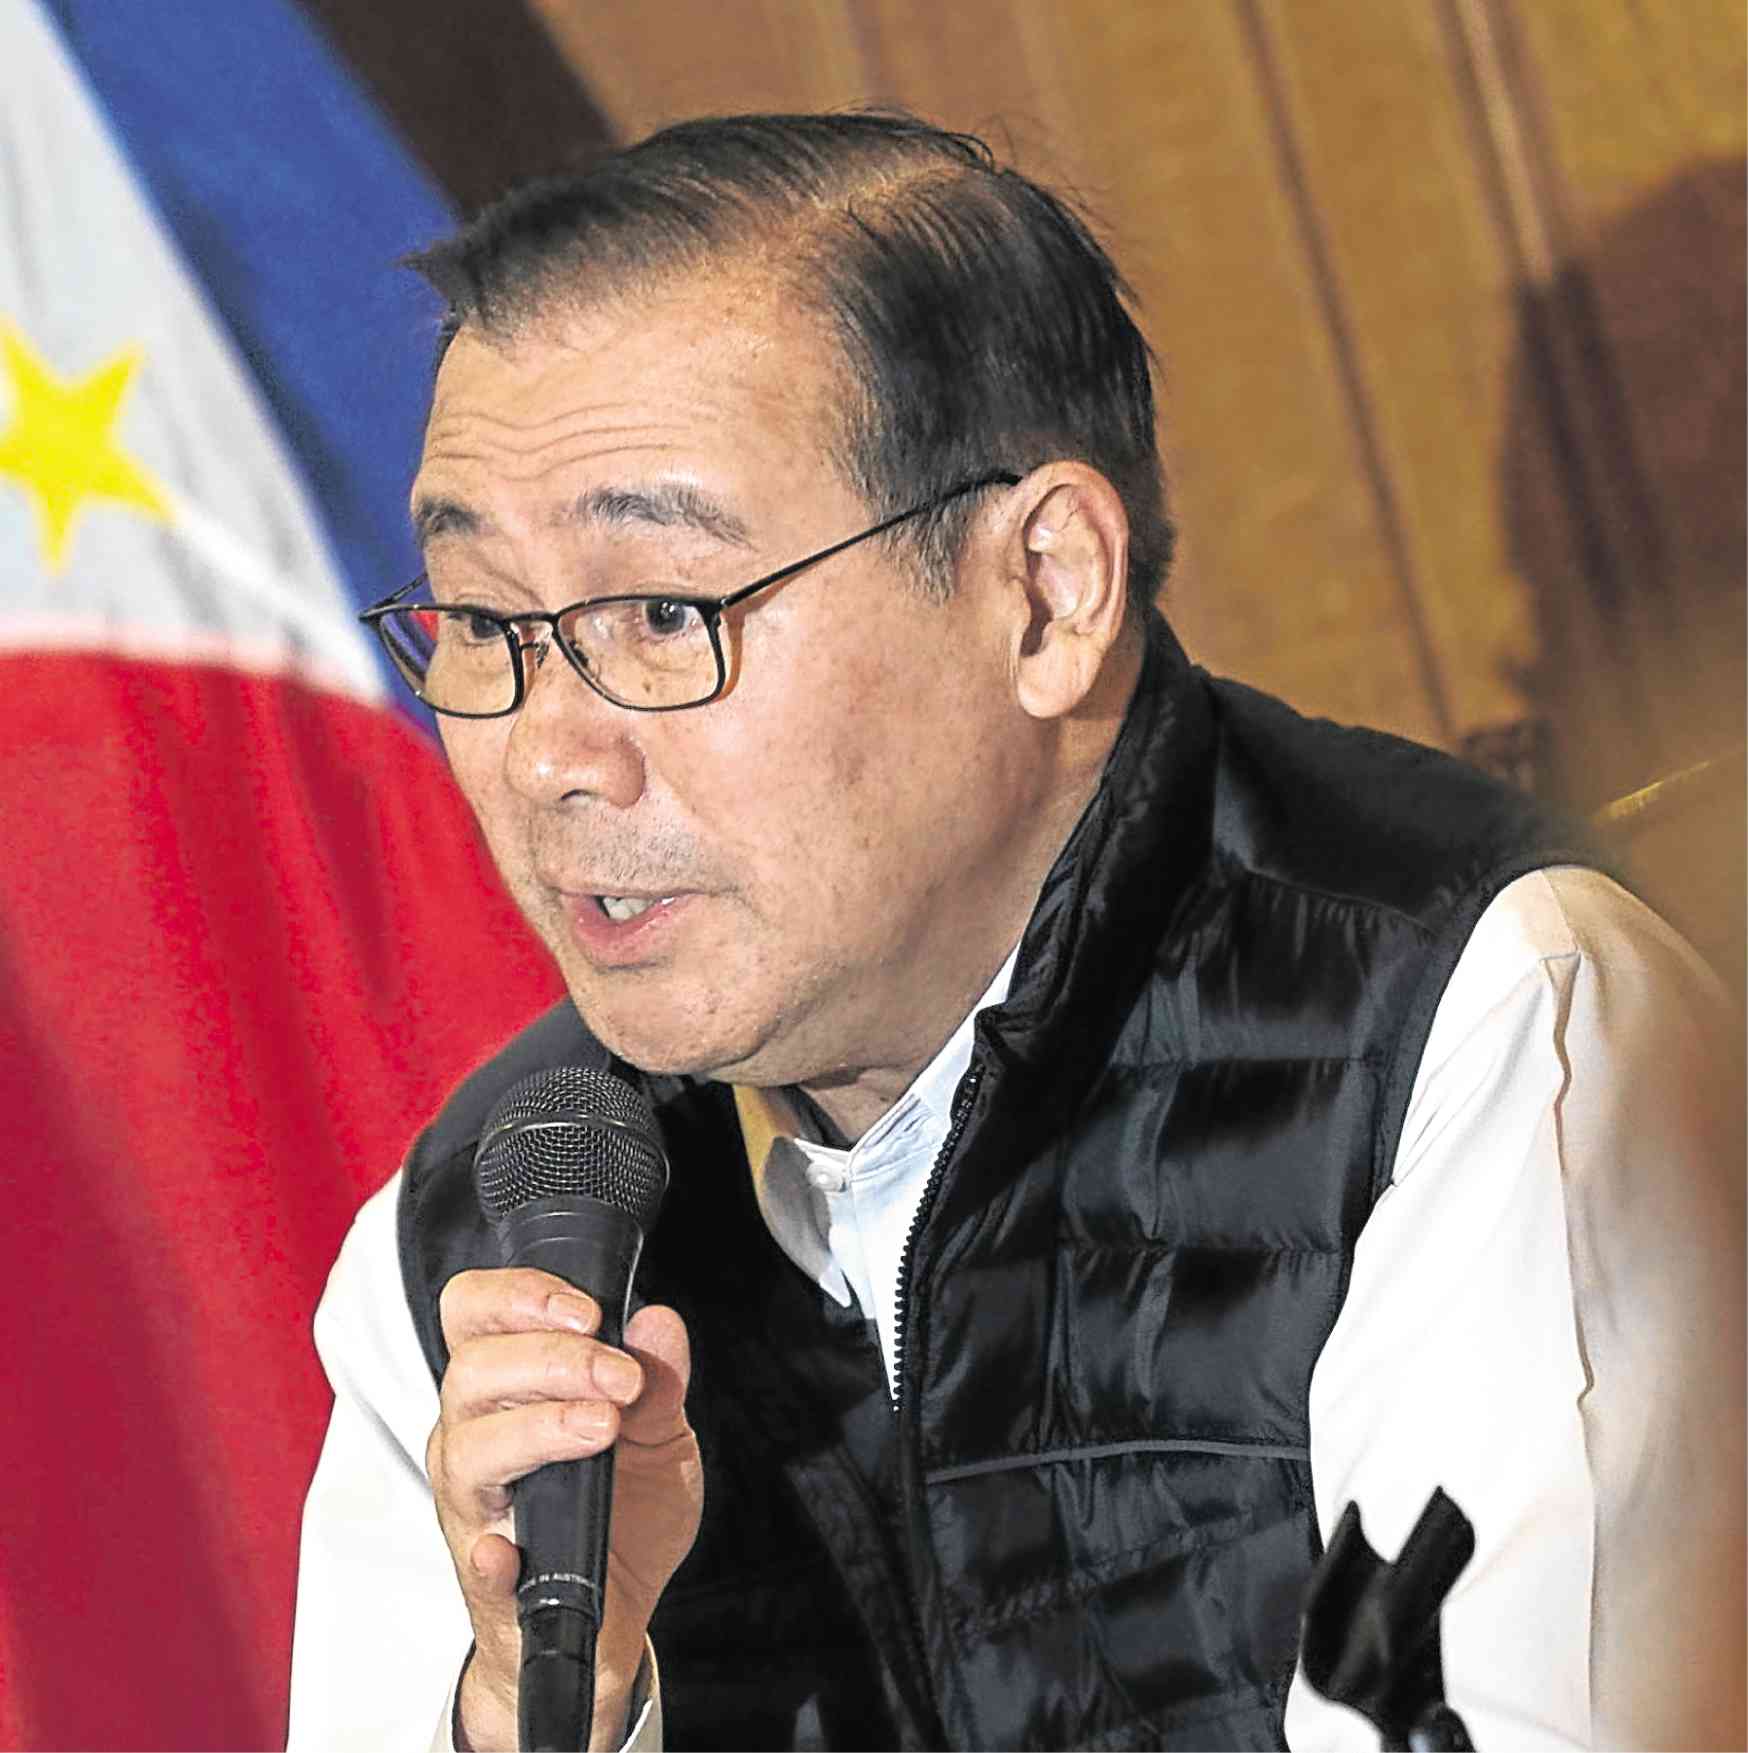 Locsin: PH should invest on weaponry than 'throwing money at poverty'